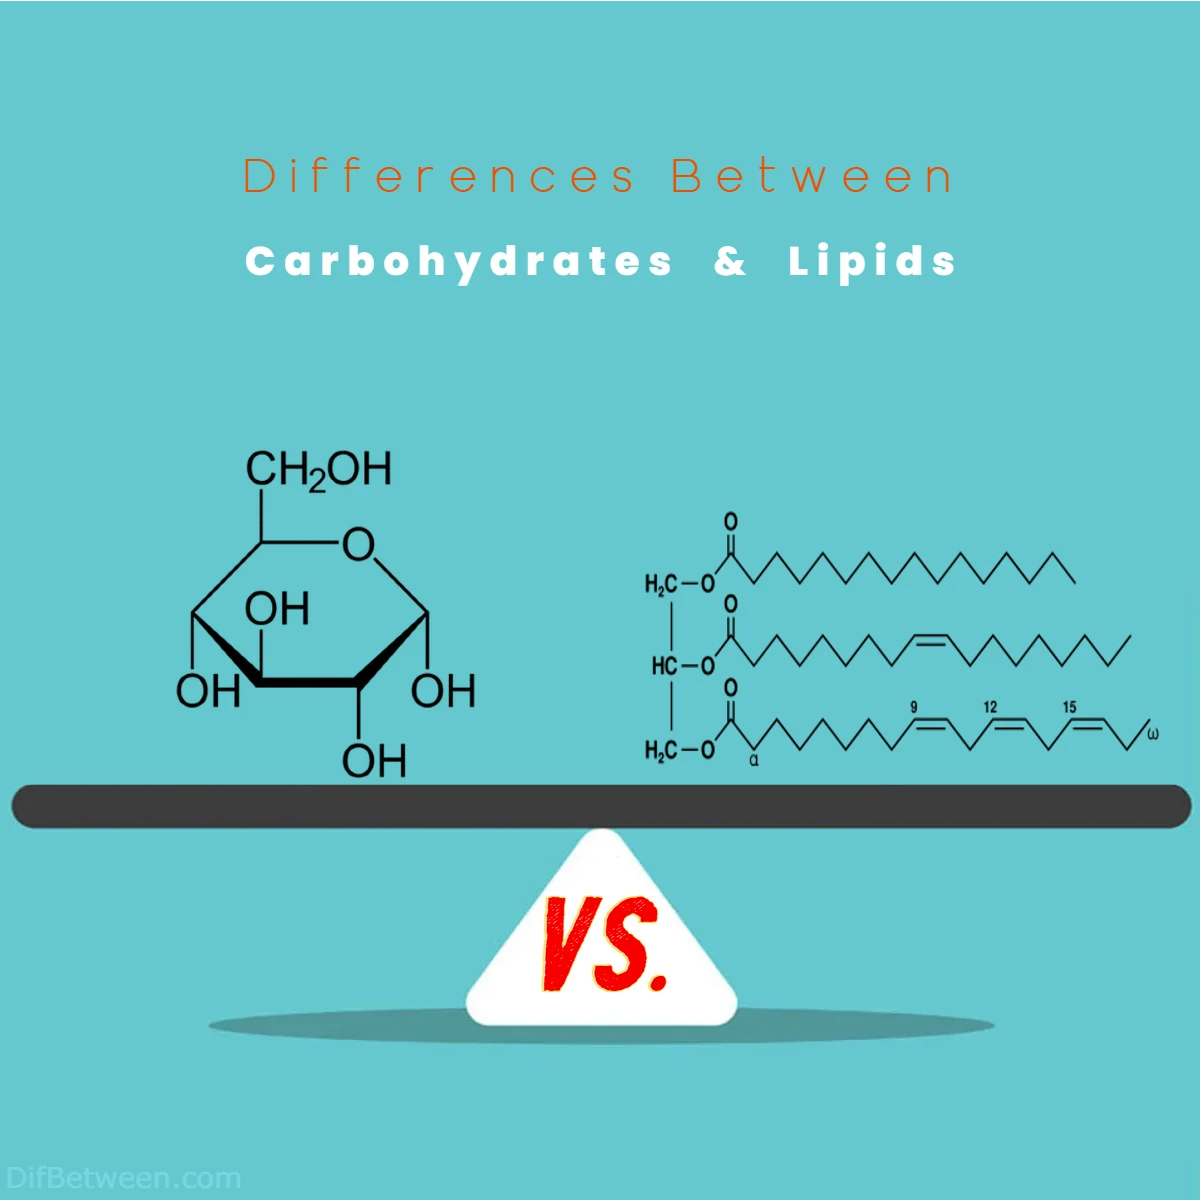 Differences Between Carbohydrates vs Lipids